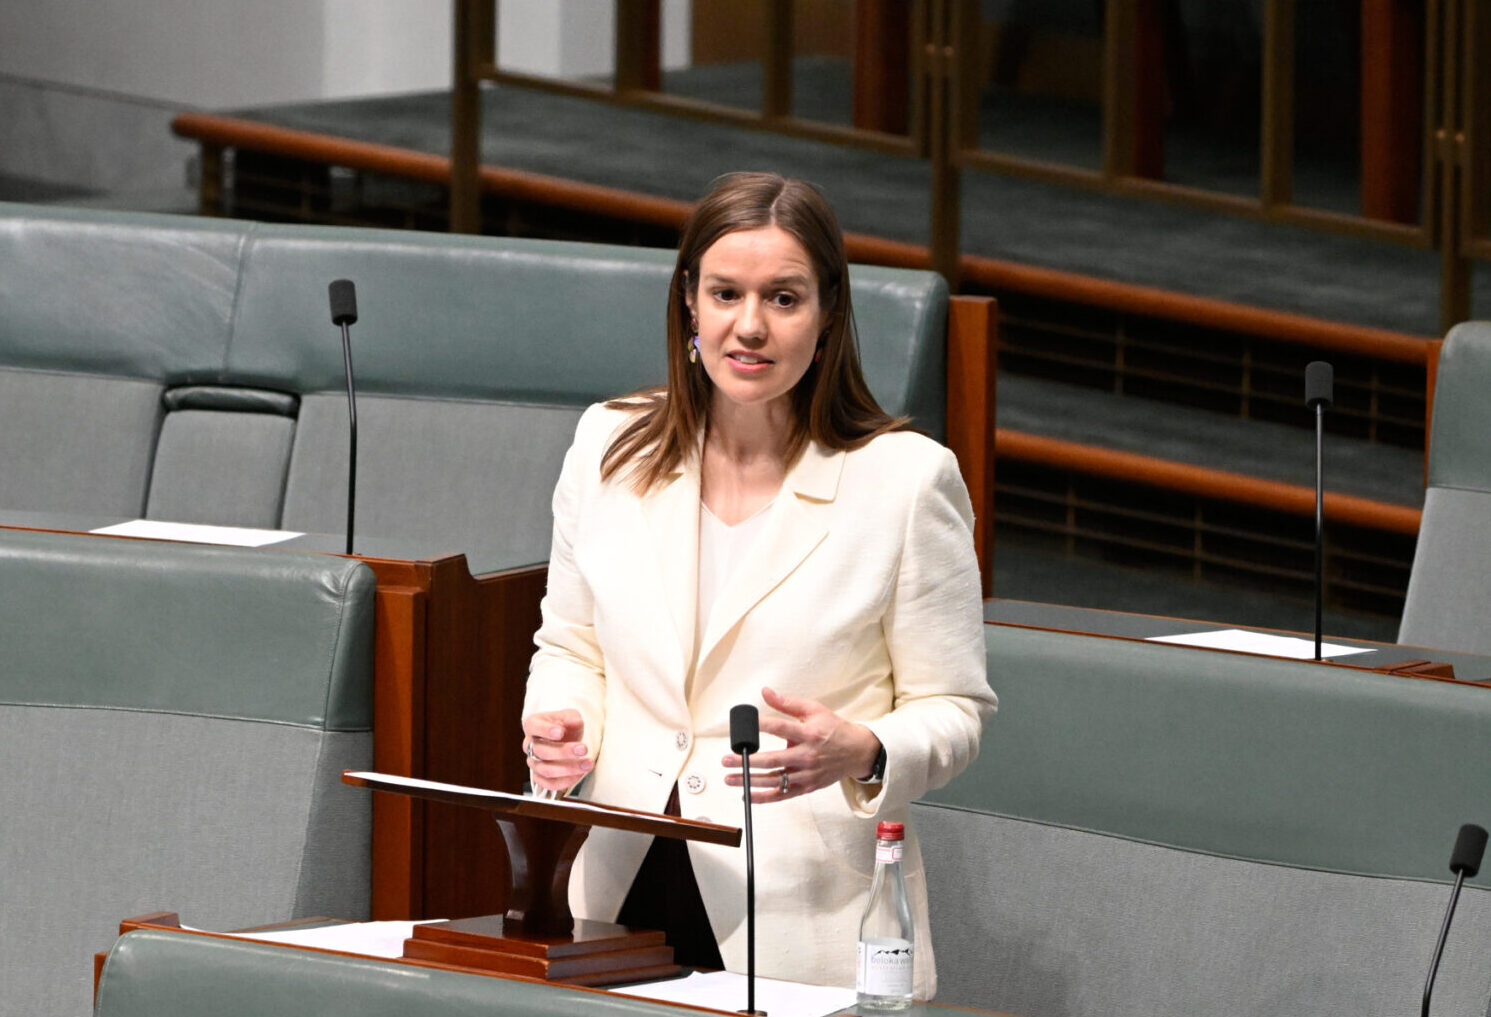 Kate Thwaites MP, Federal Member for Jagajaga, speaking in Parliament's House of Representatives in Canberra.